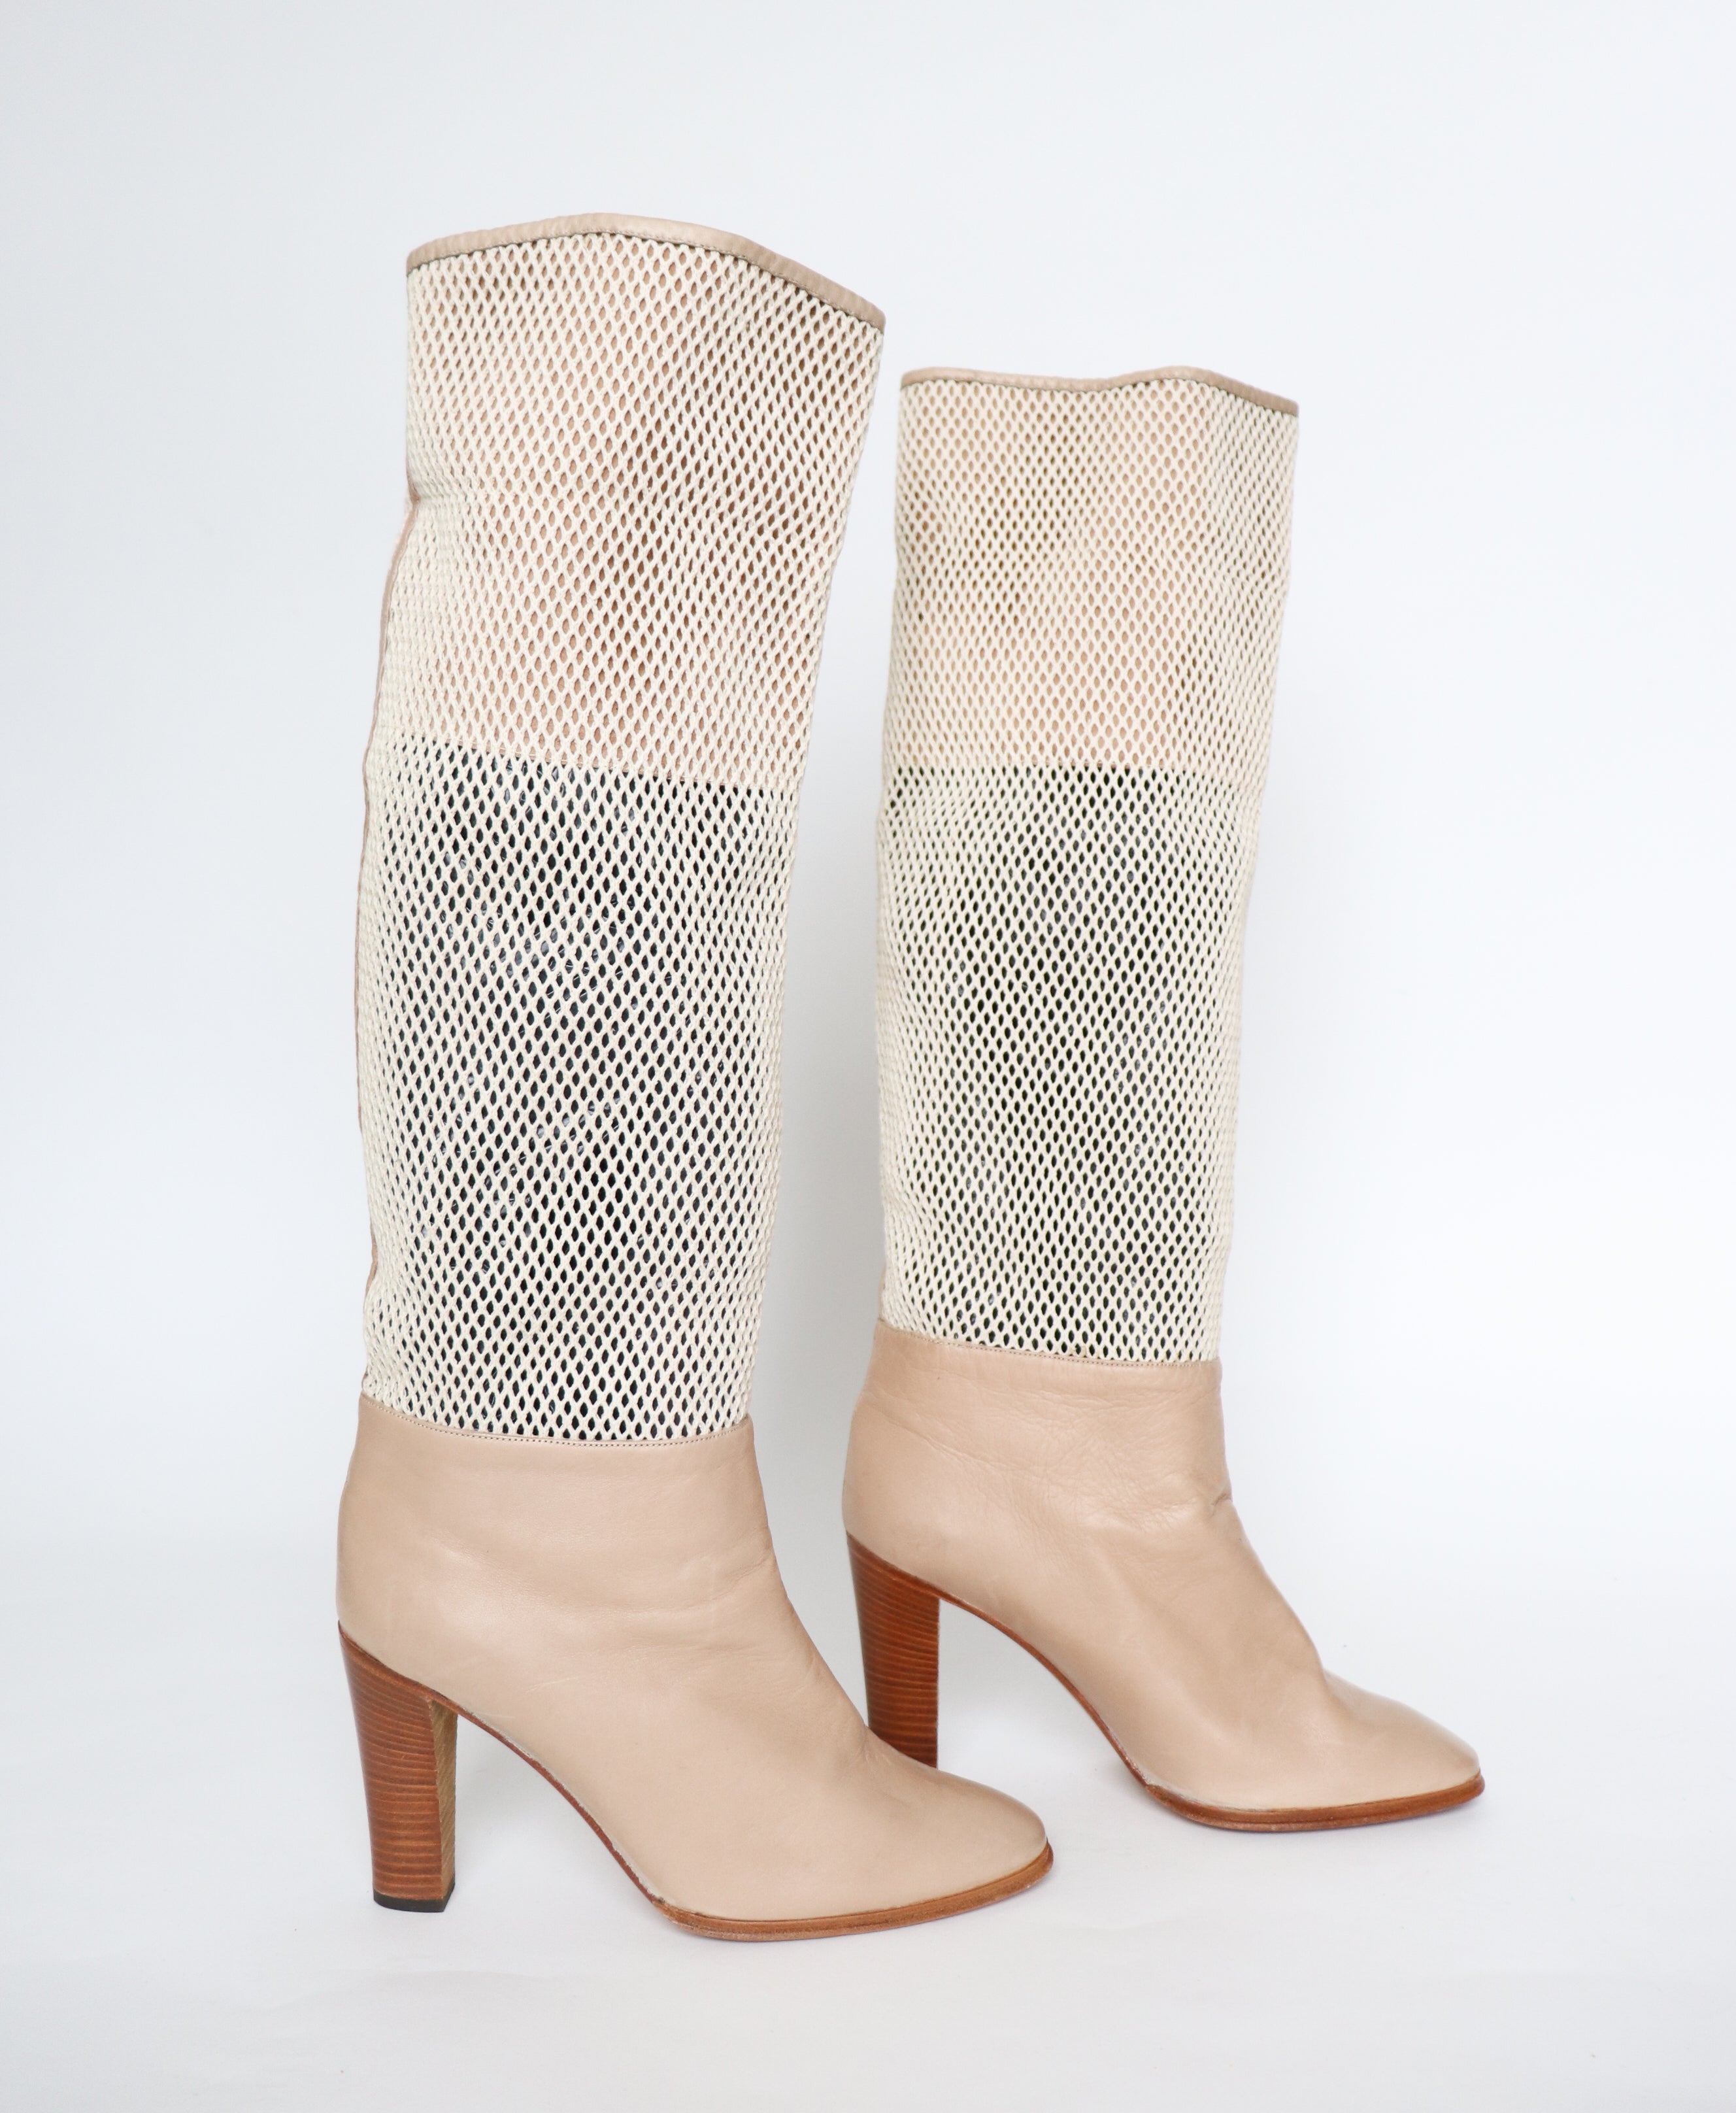 1980s Long Boots - Cream Leather / Mesh - Valmy Moda -  Label 41 - Fit UK 7 / 40